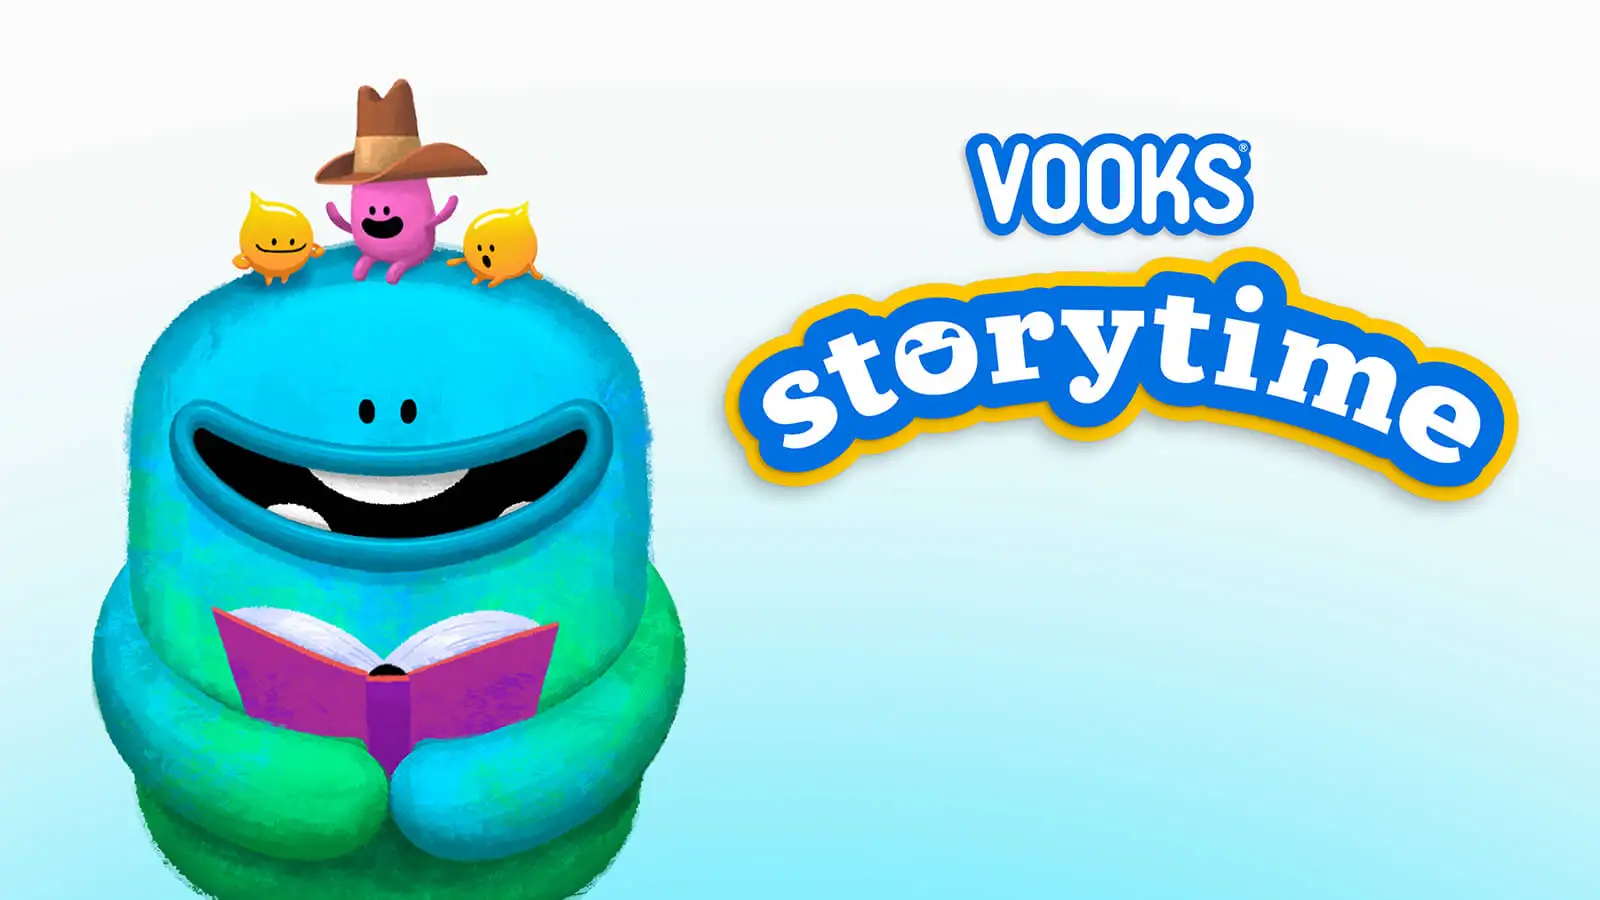 Vooks animated stories teach kids about kindness, self-awareness,  self-management of emotions and relationship skills